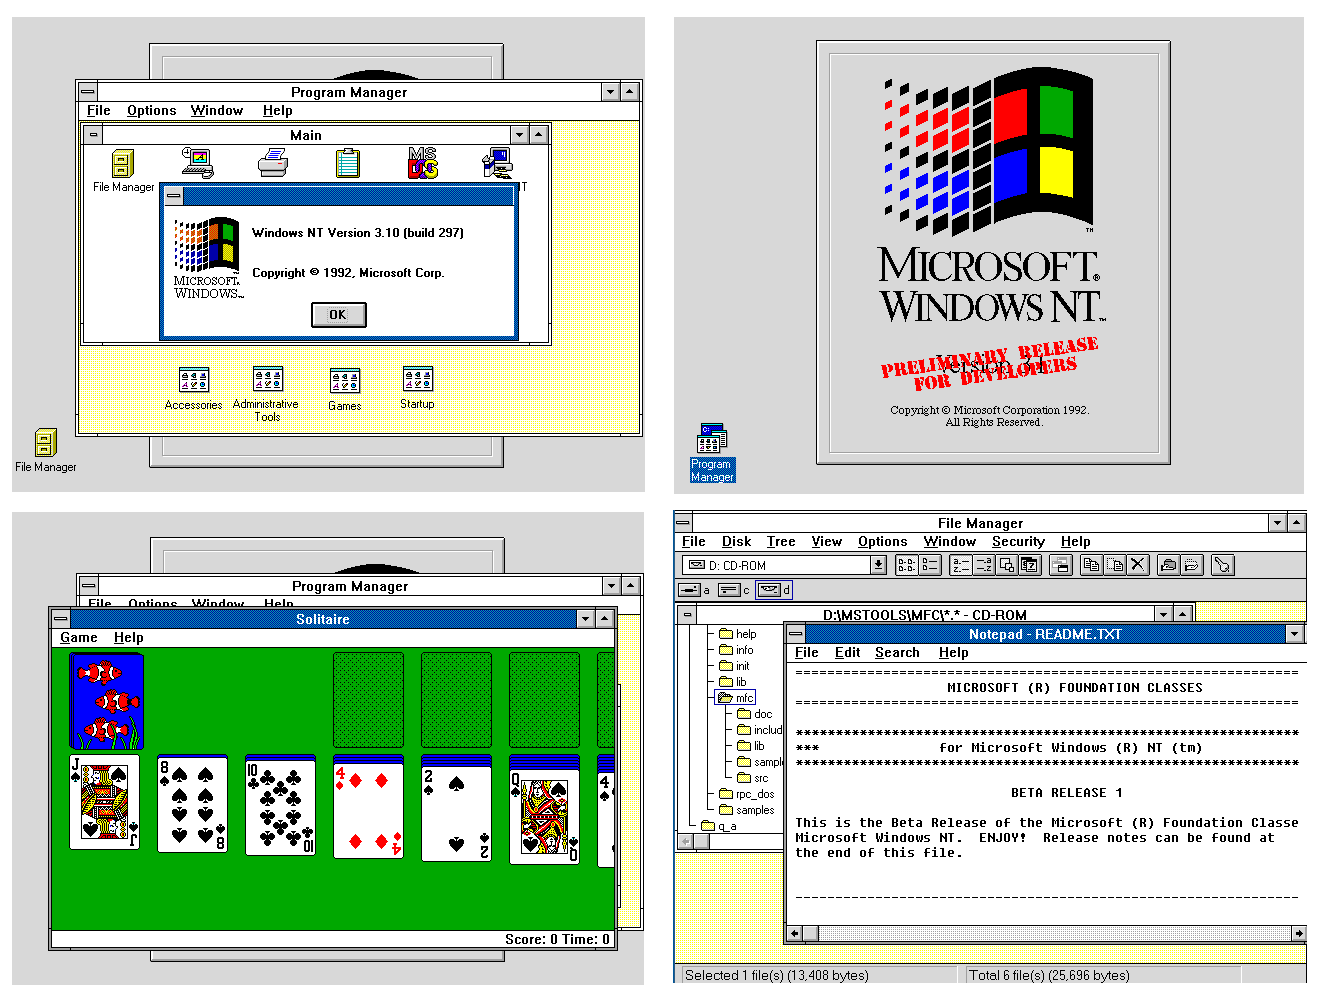 Several screen shots of Windows NT 3.1 297 including some of my own code.